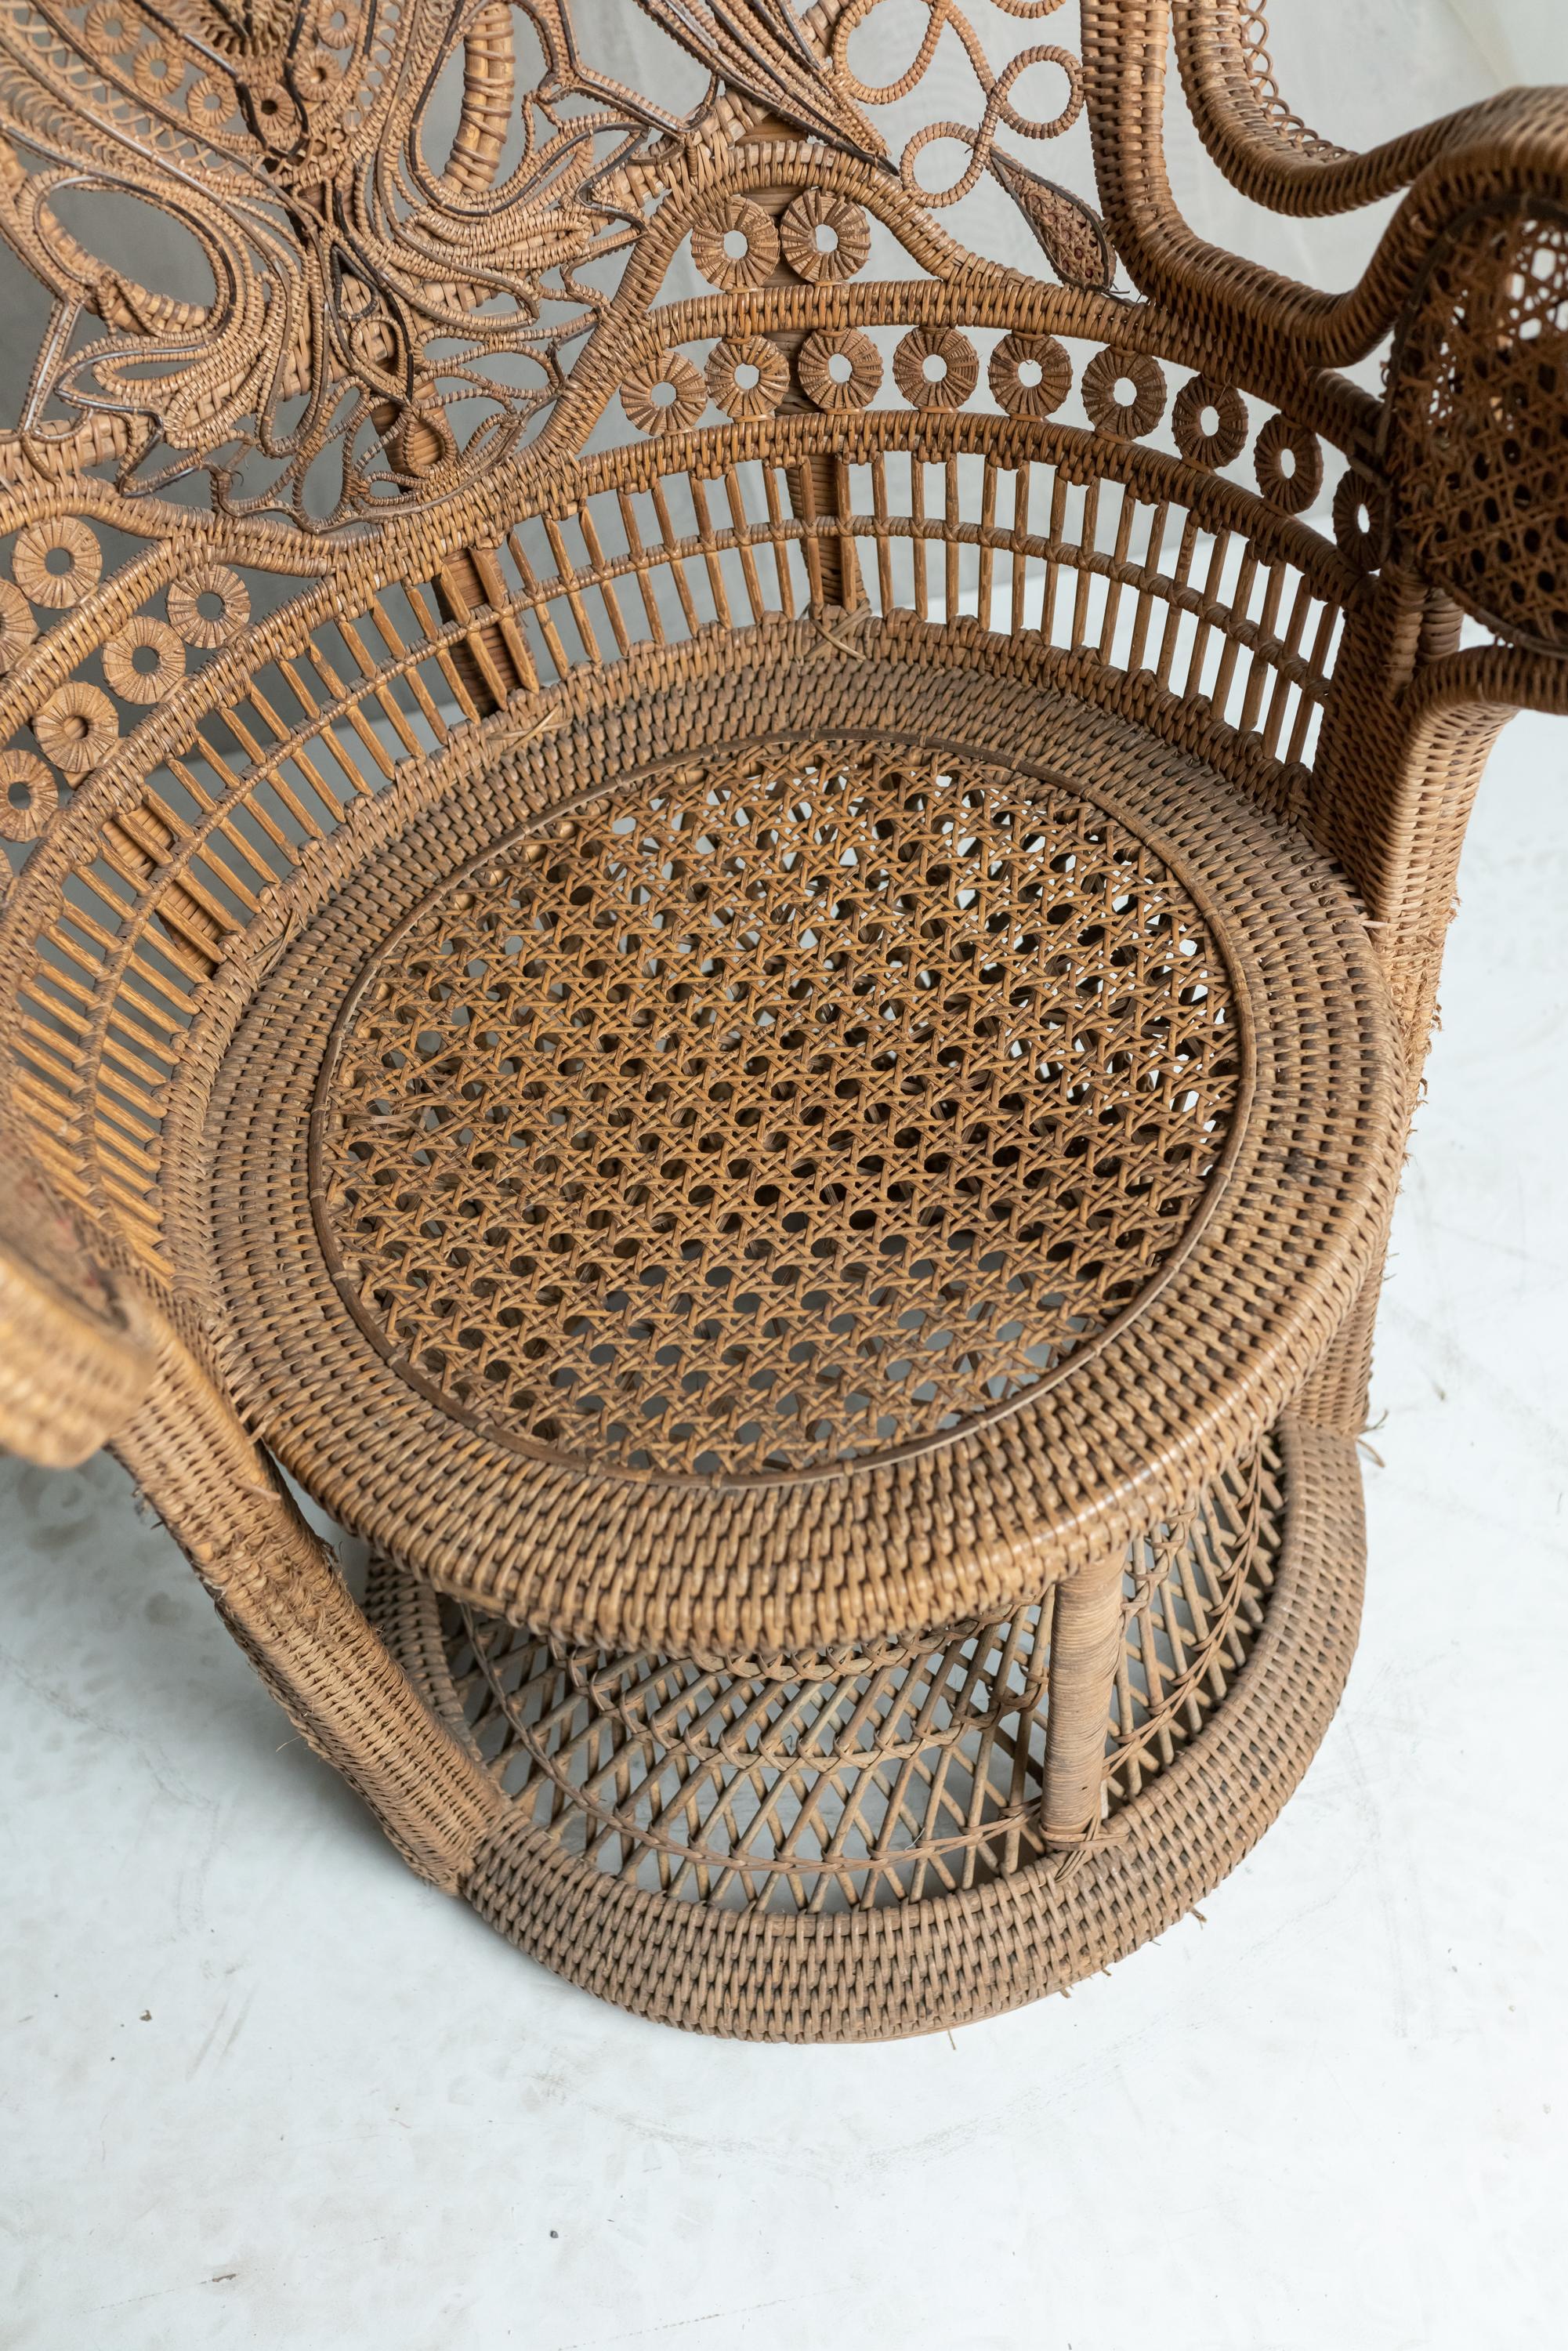 Mid-20th Century French Vintage Rattan 